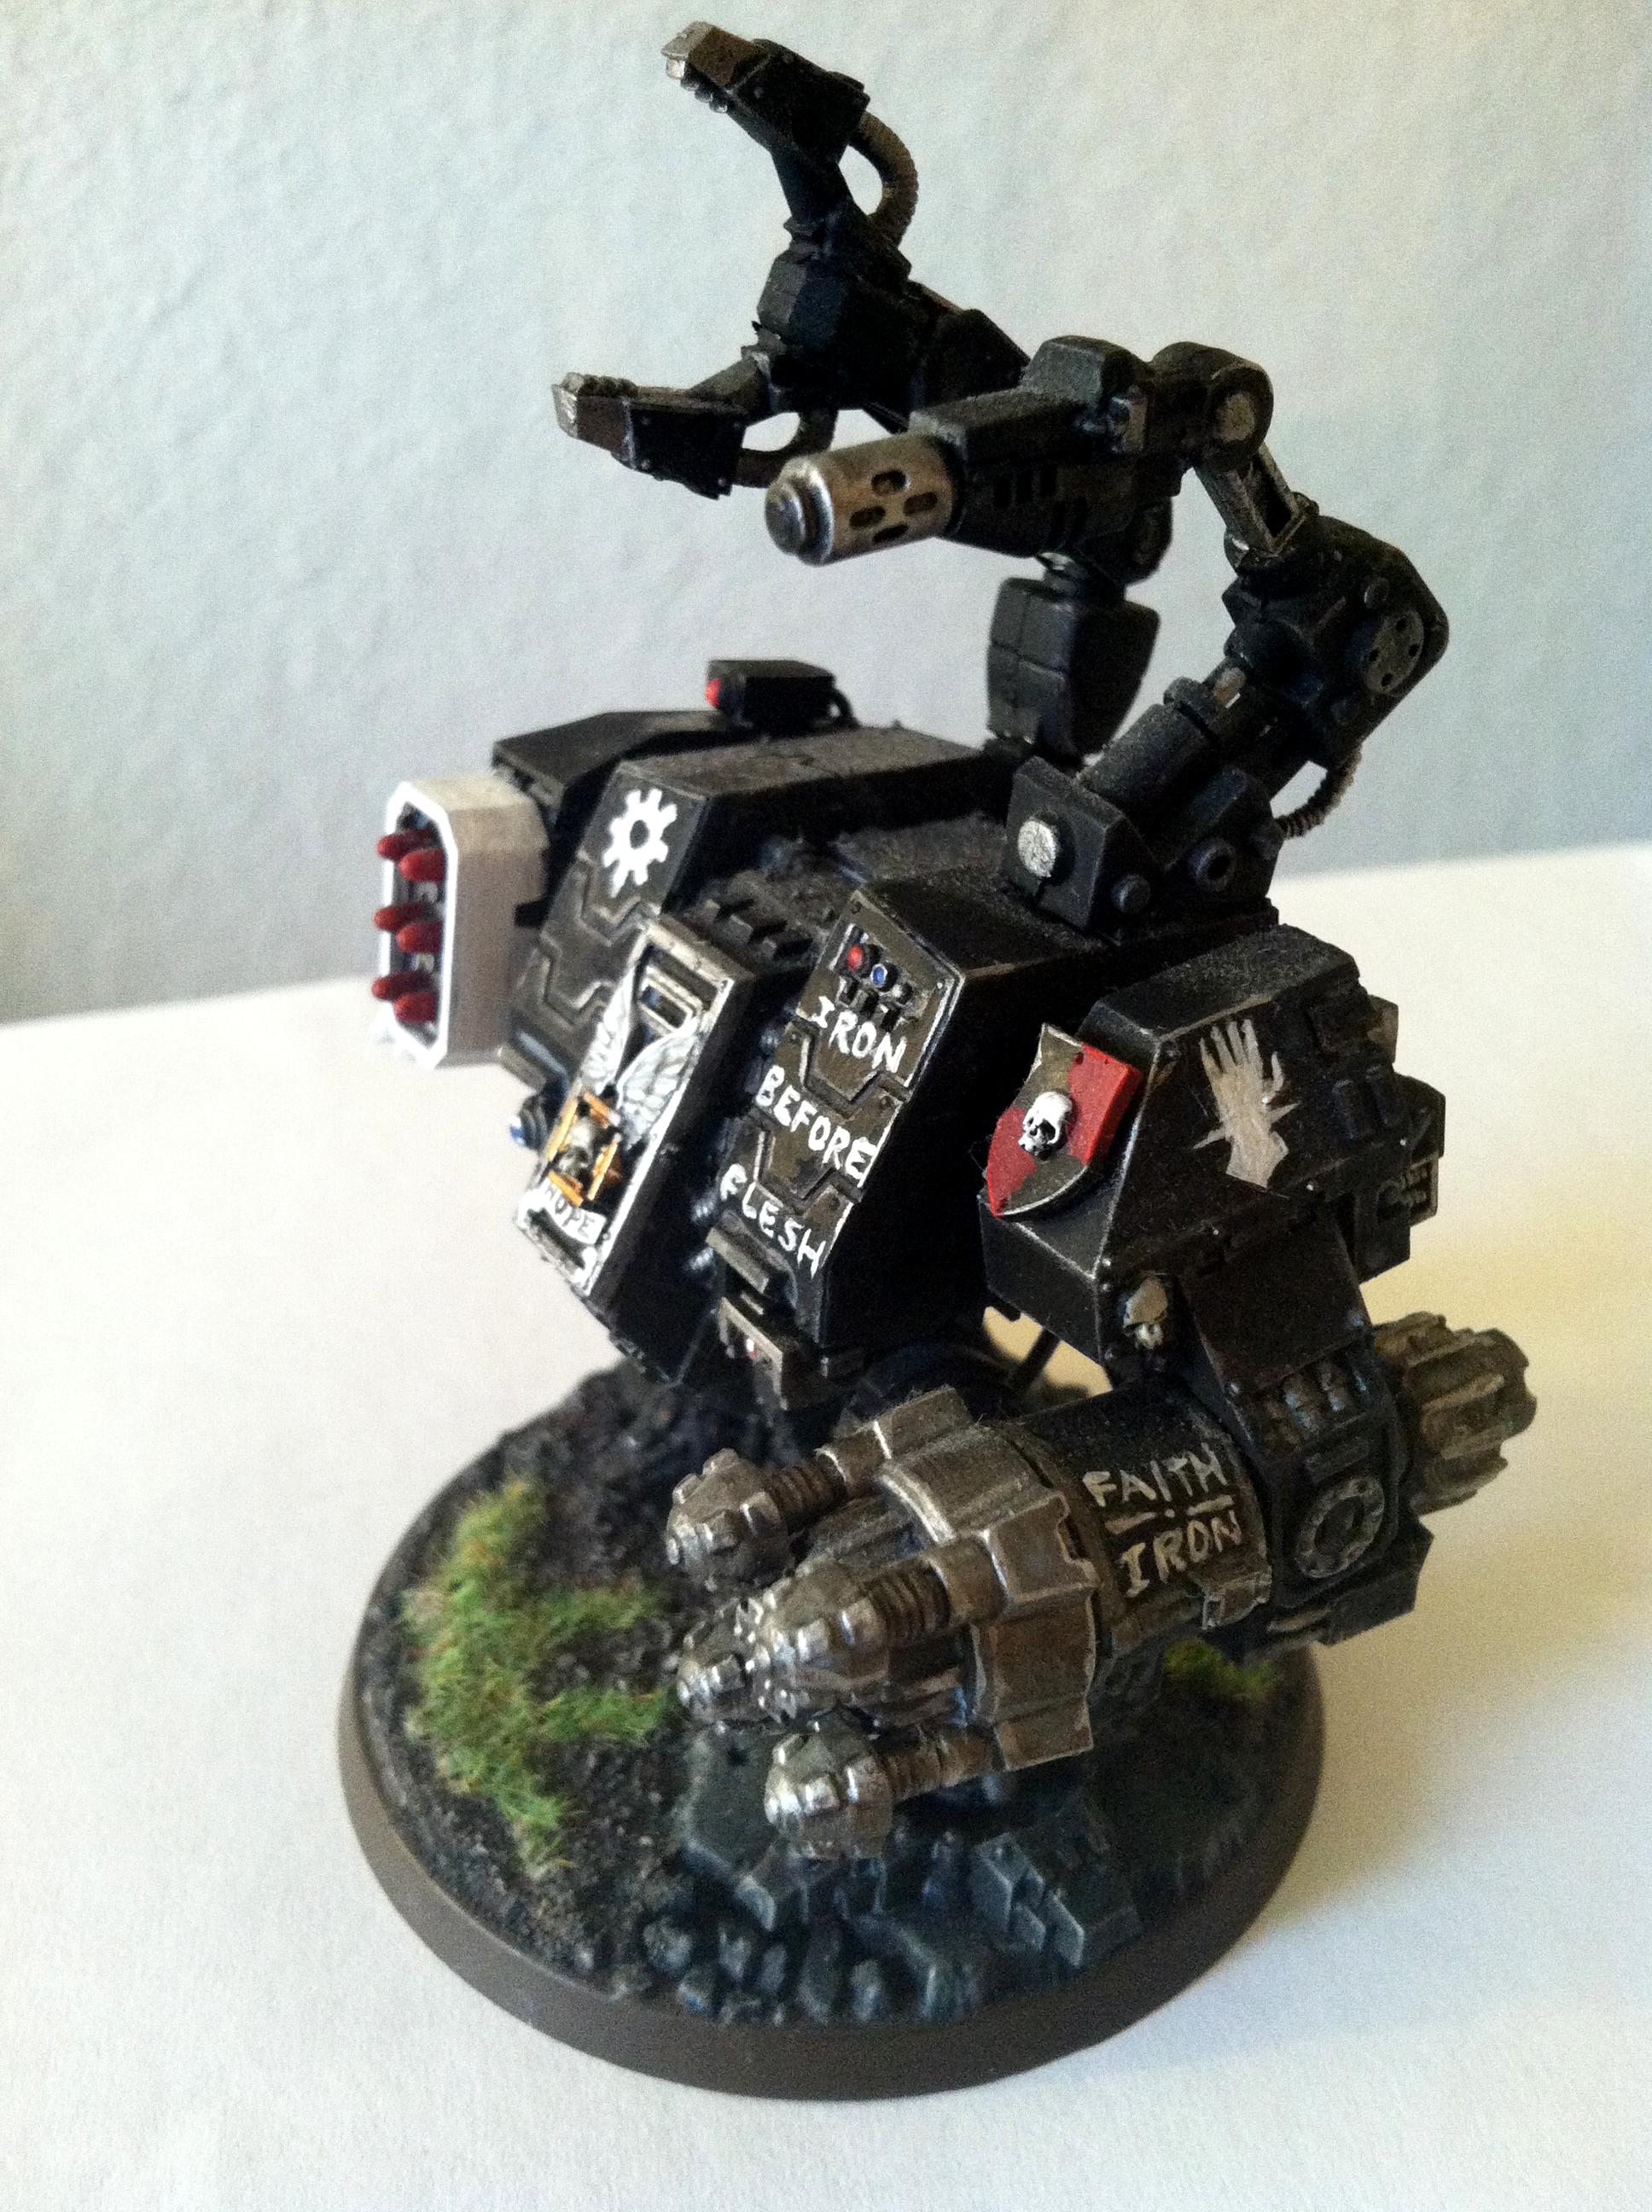 Dreadnought, Iron Hands, Space Marines, Venerable Dreadnought